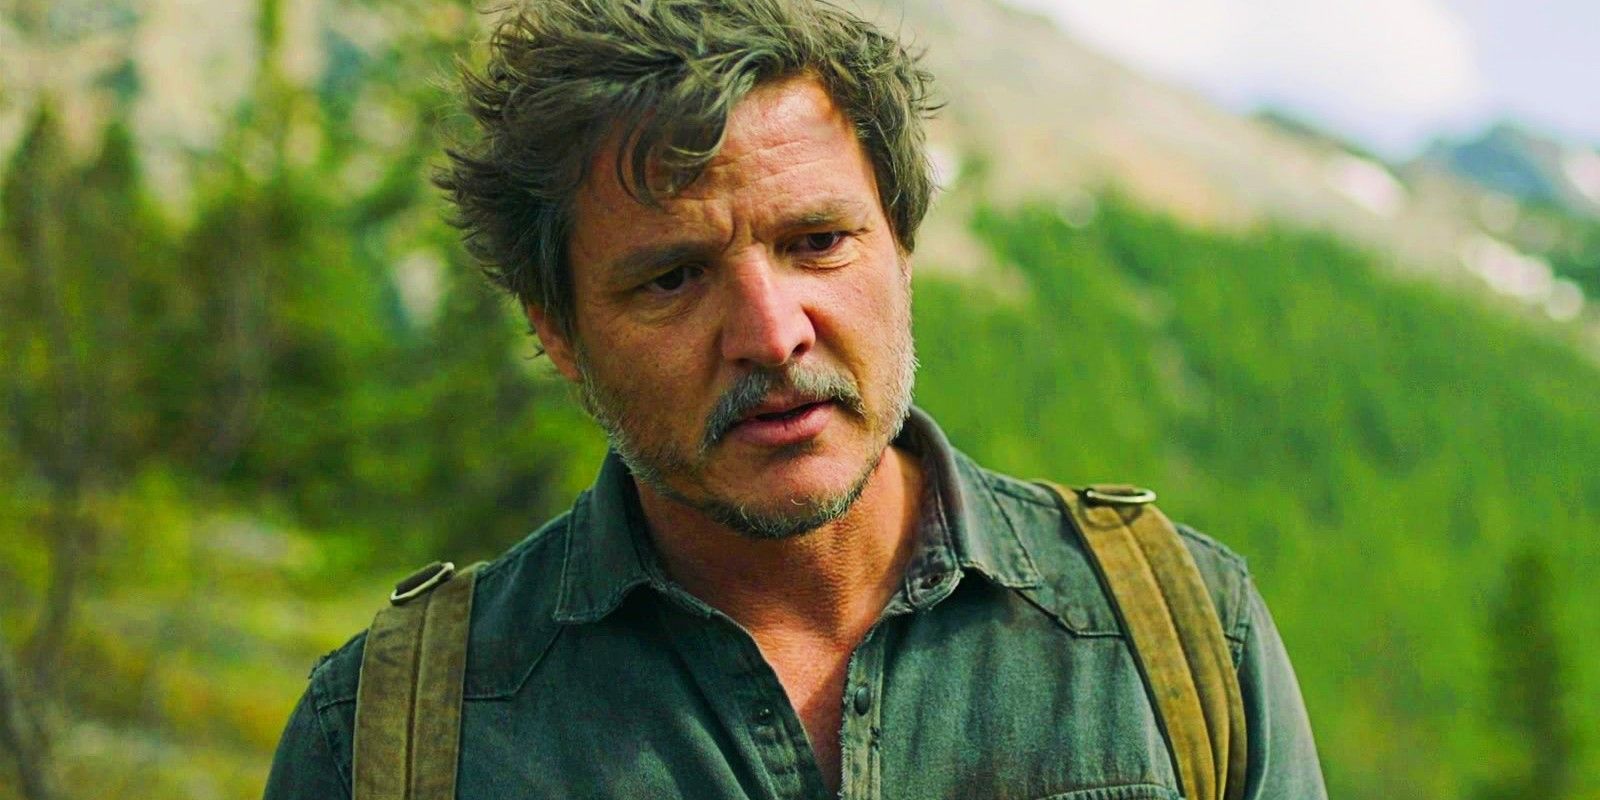 Pedro Pascal as Joel in The Last of Us season 1 episode 9